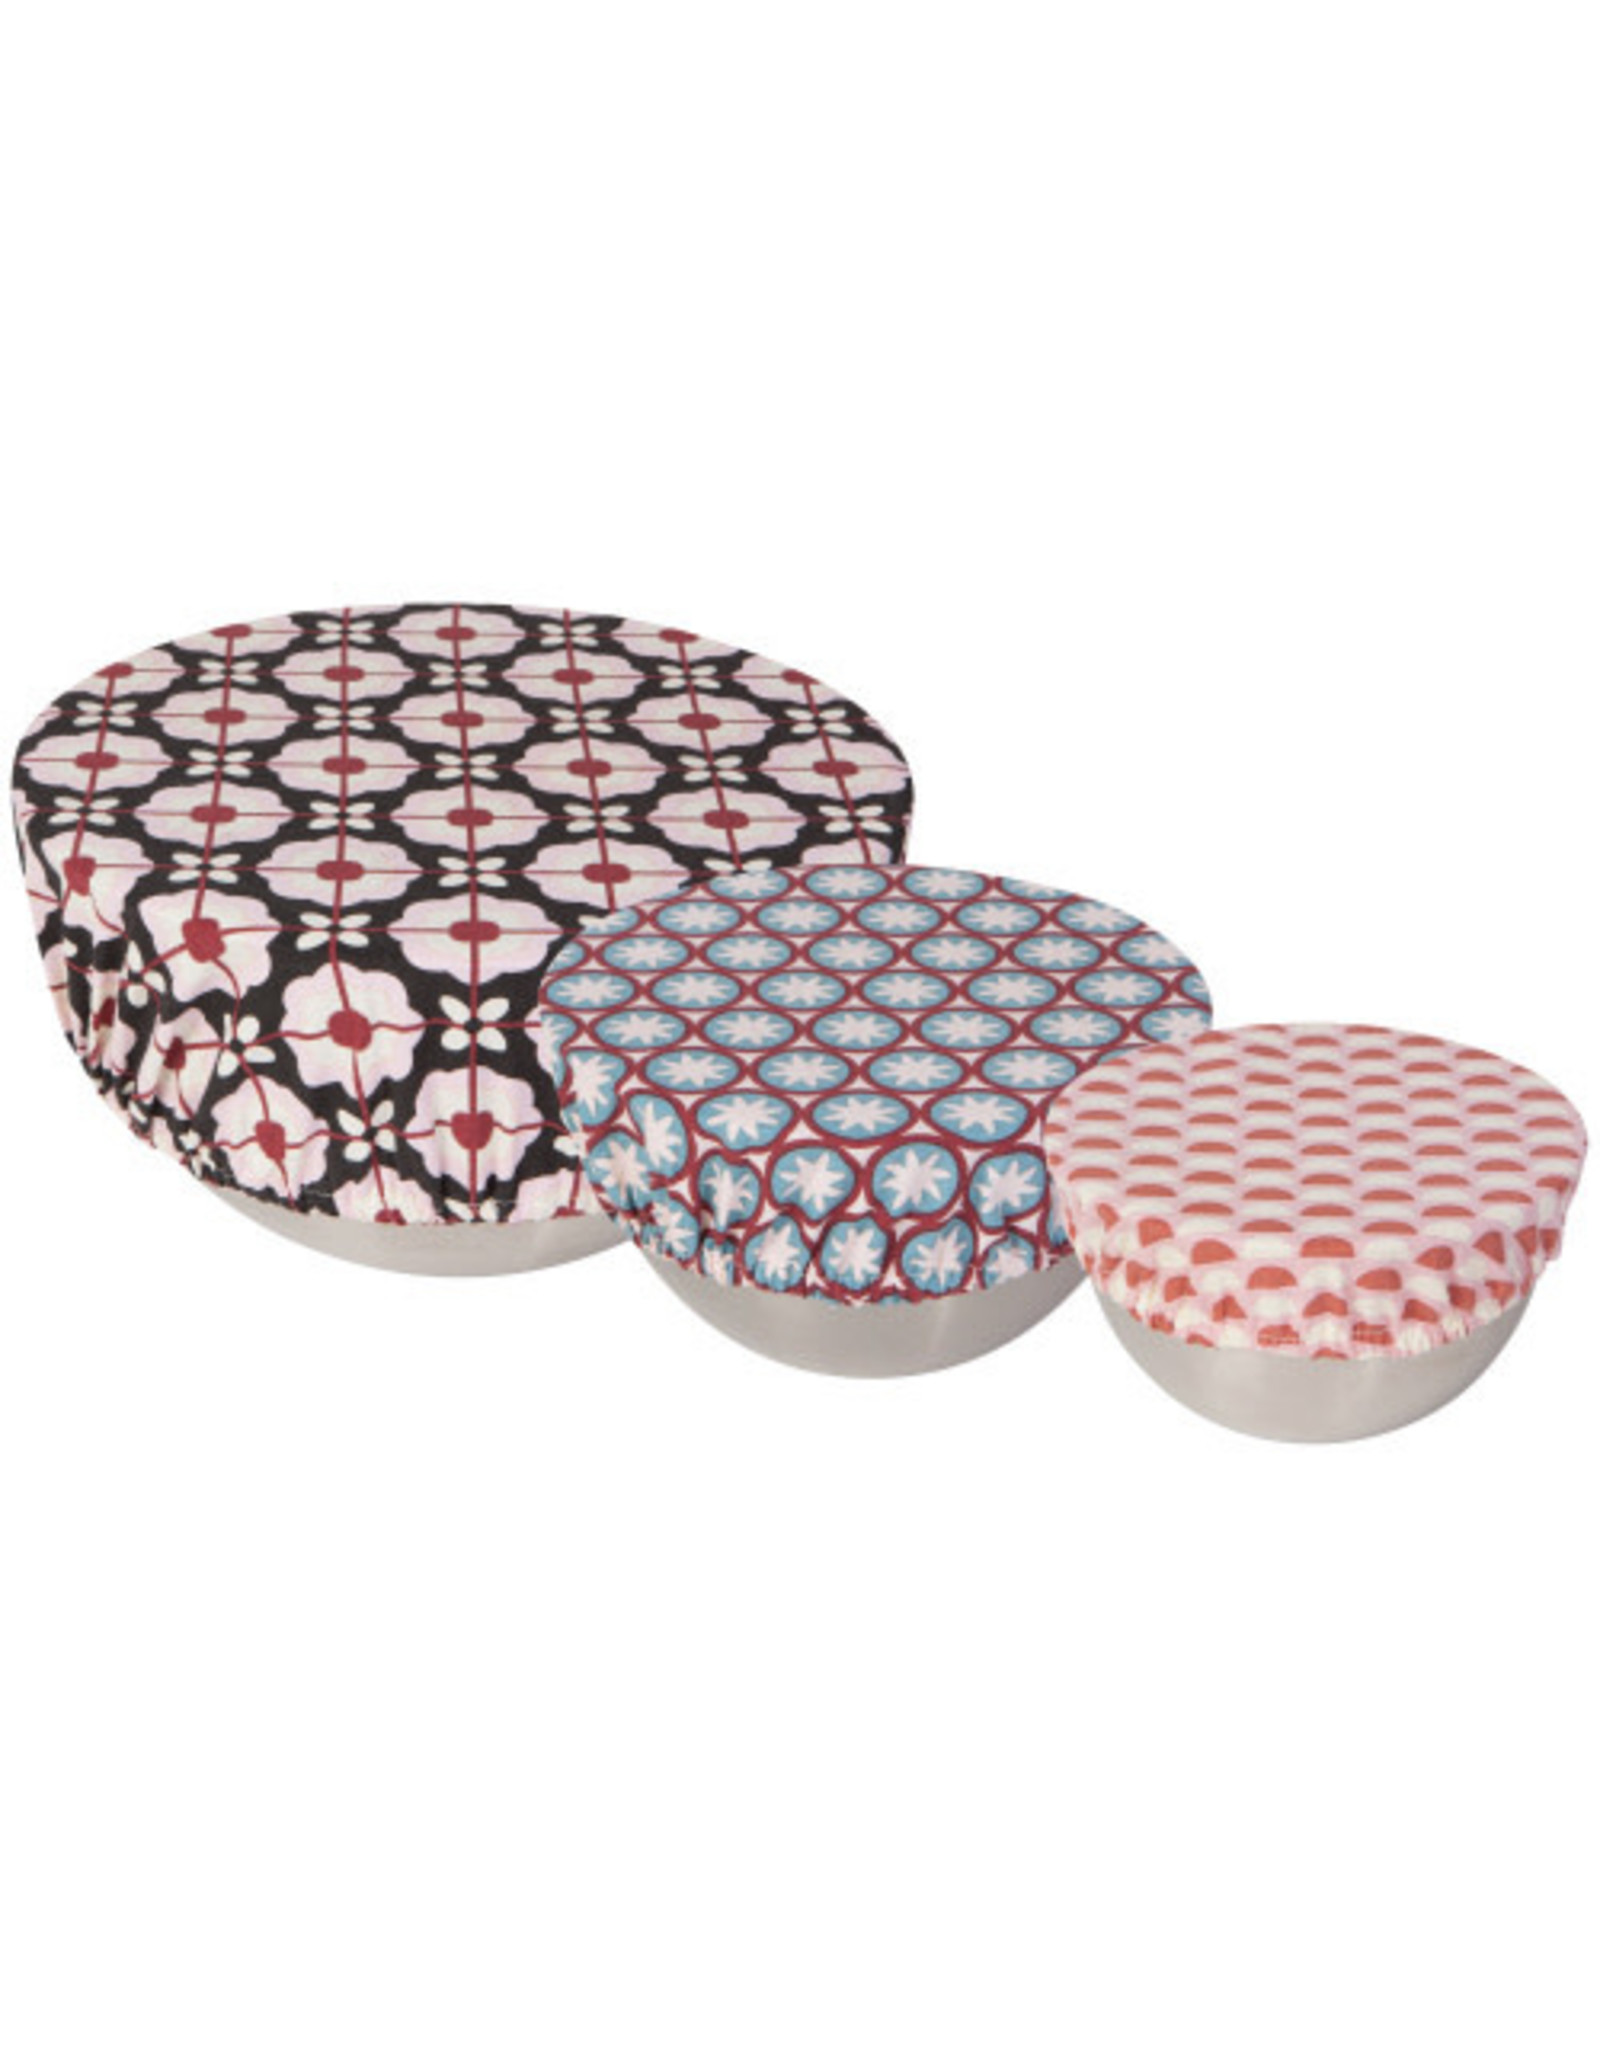 Bowl Cover Set of 3 - Paseo